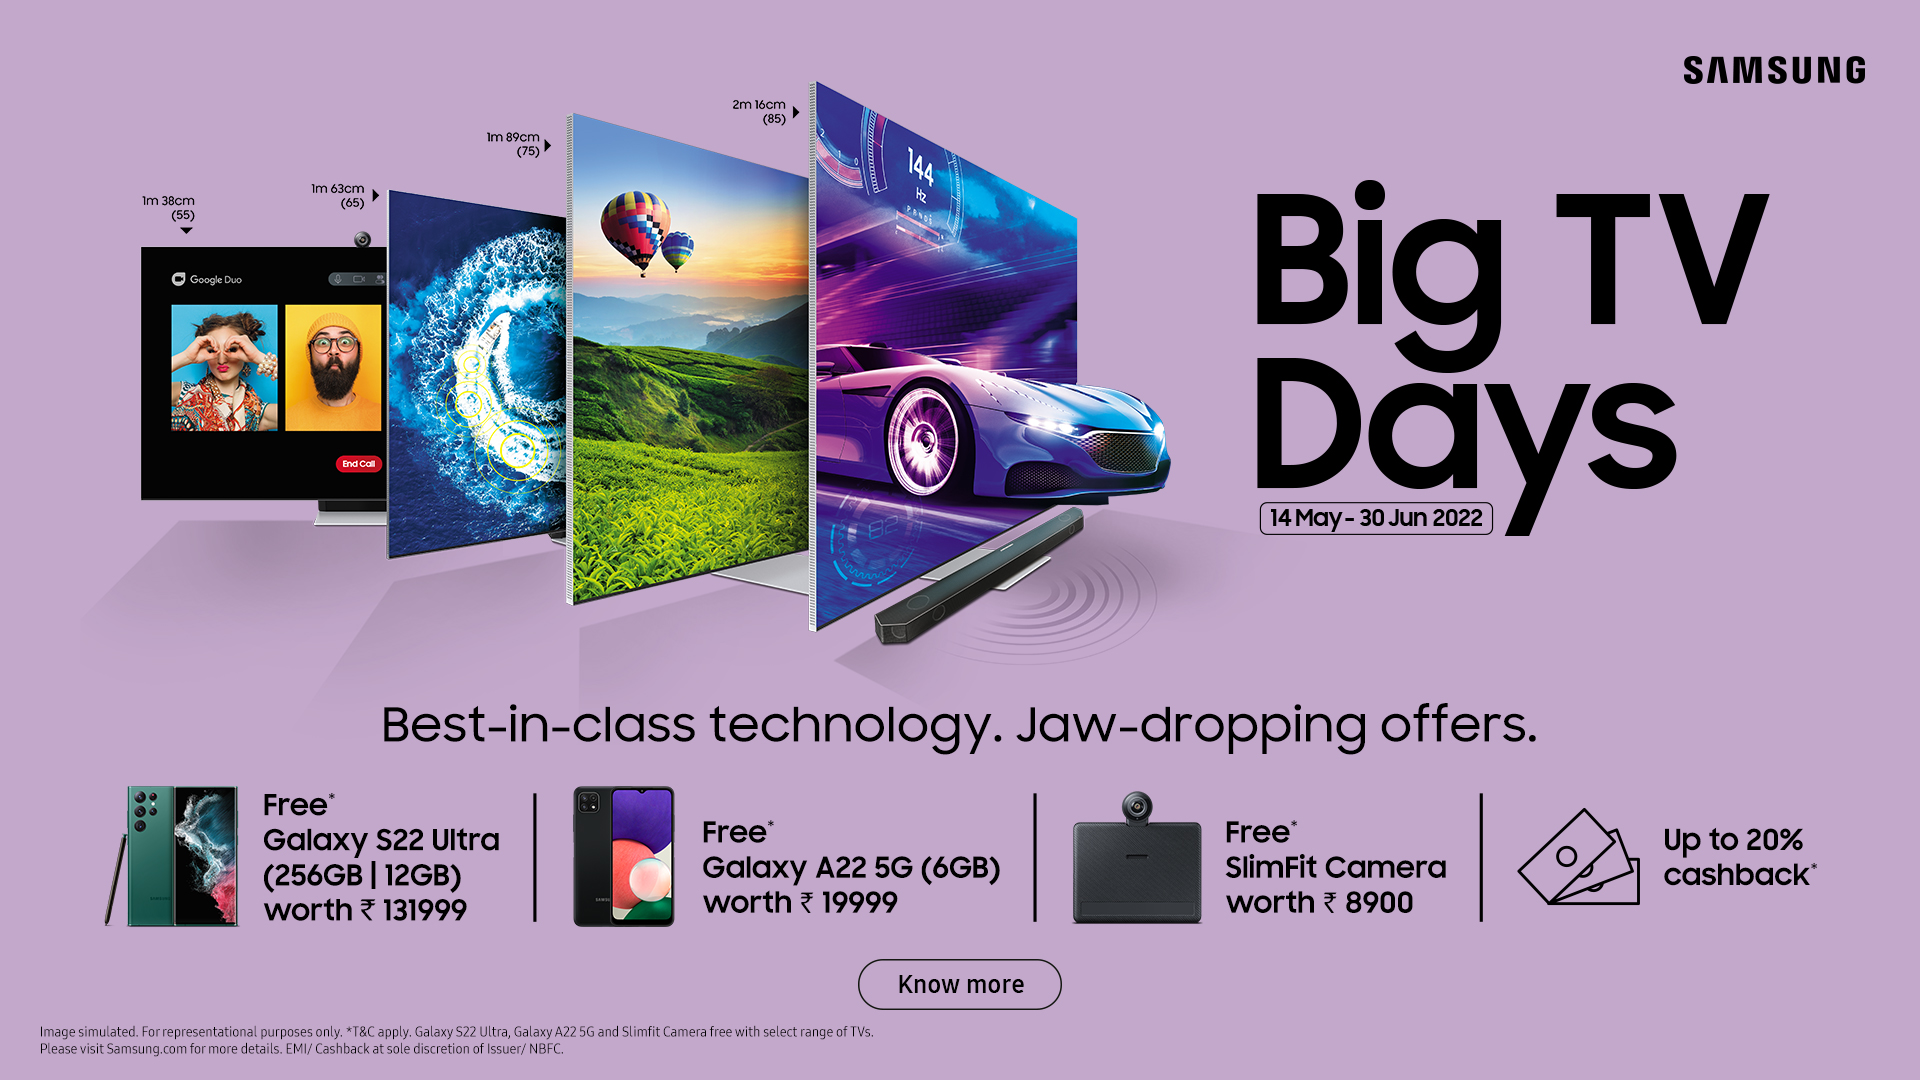 ‘Samsung Big TV Days’ Gets Bigger & Better Than Ever with Exciting Offers and Assured Gifts on Big Screen TVs